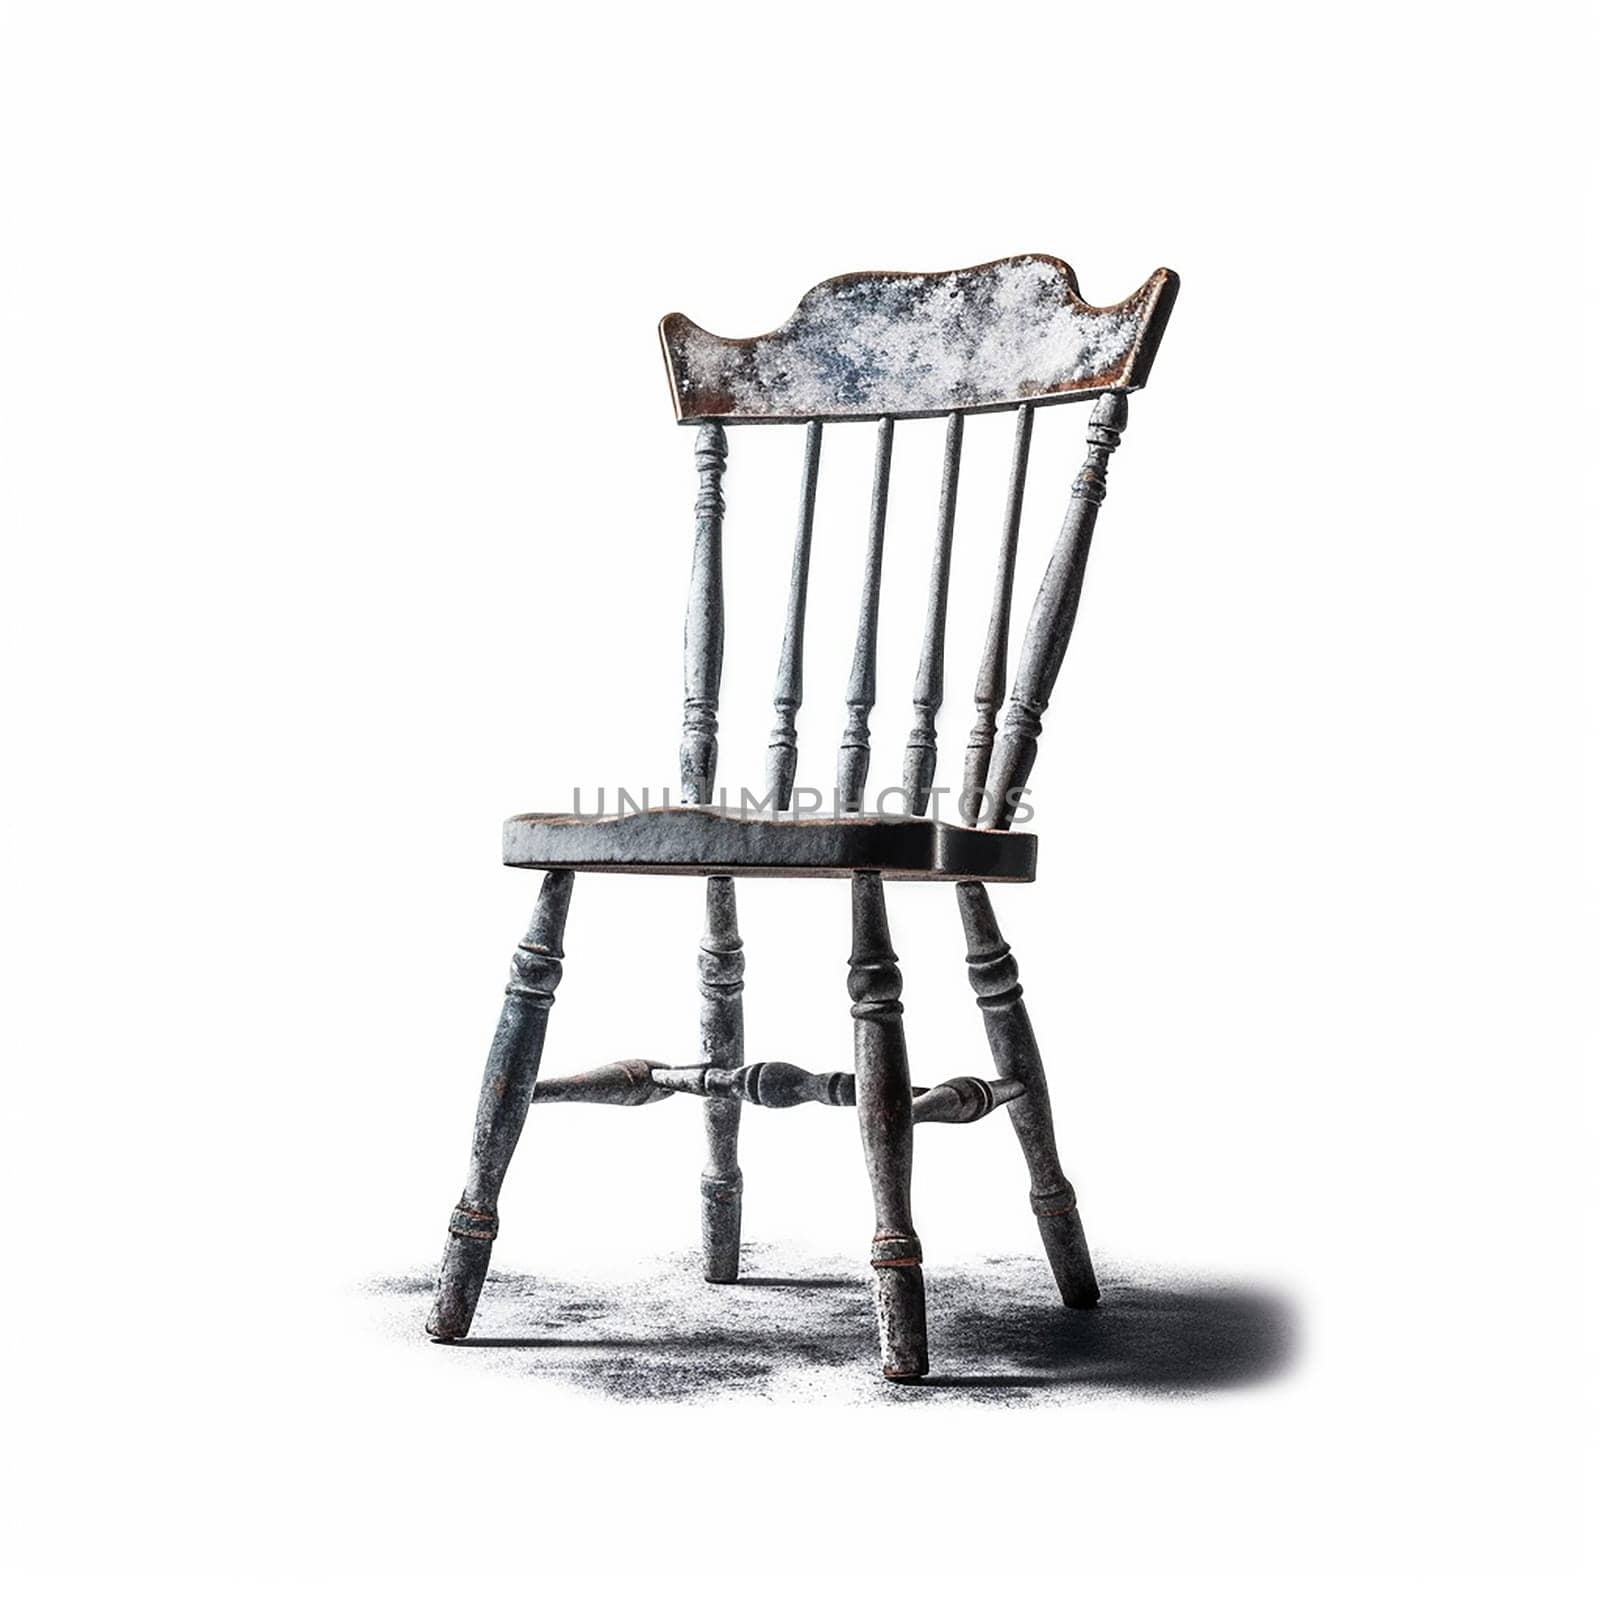 Vintage chair isolated on white background.